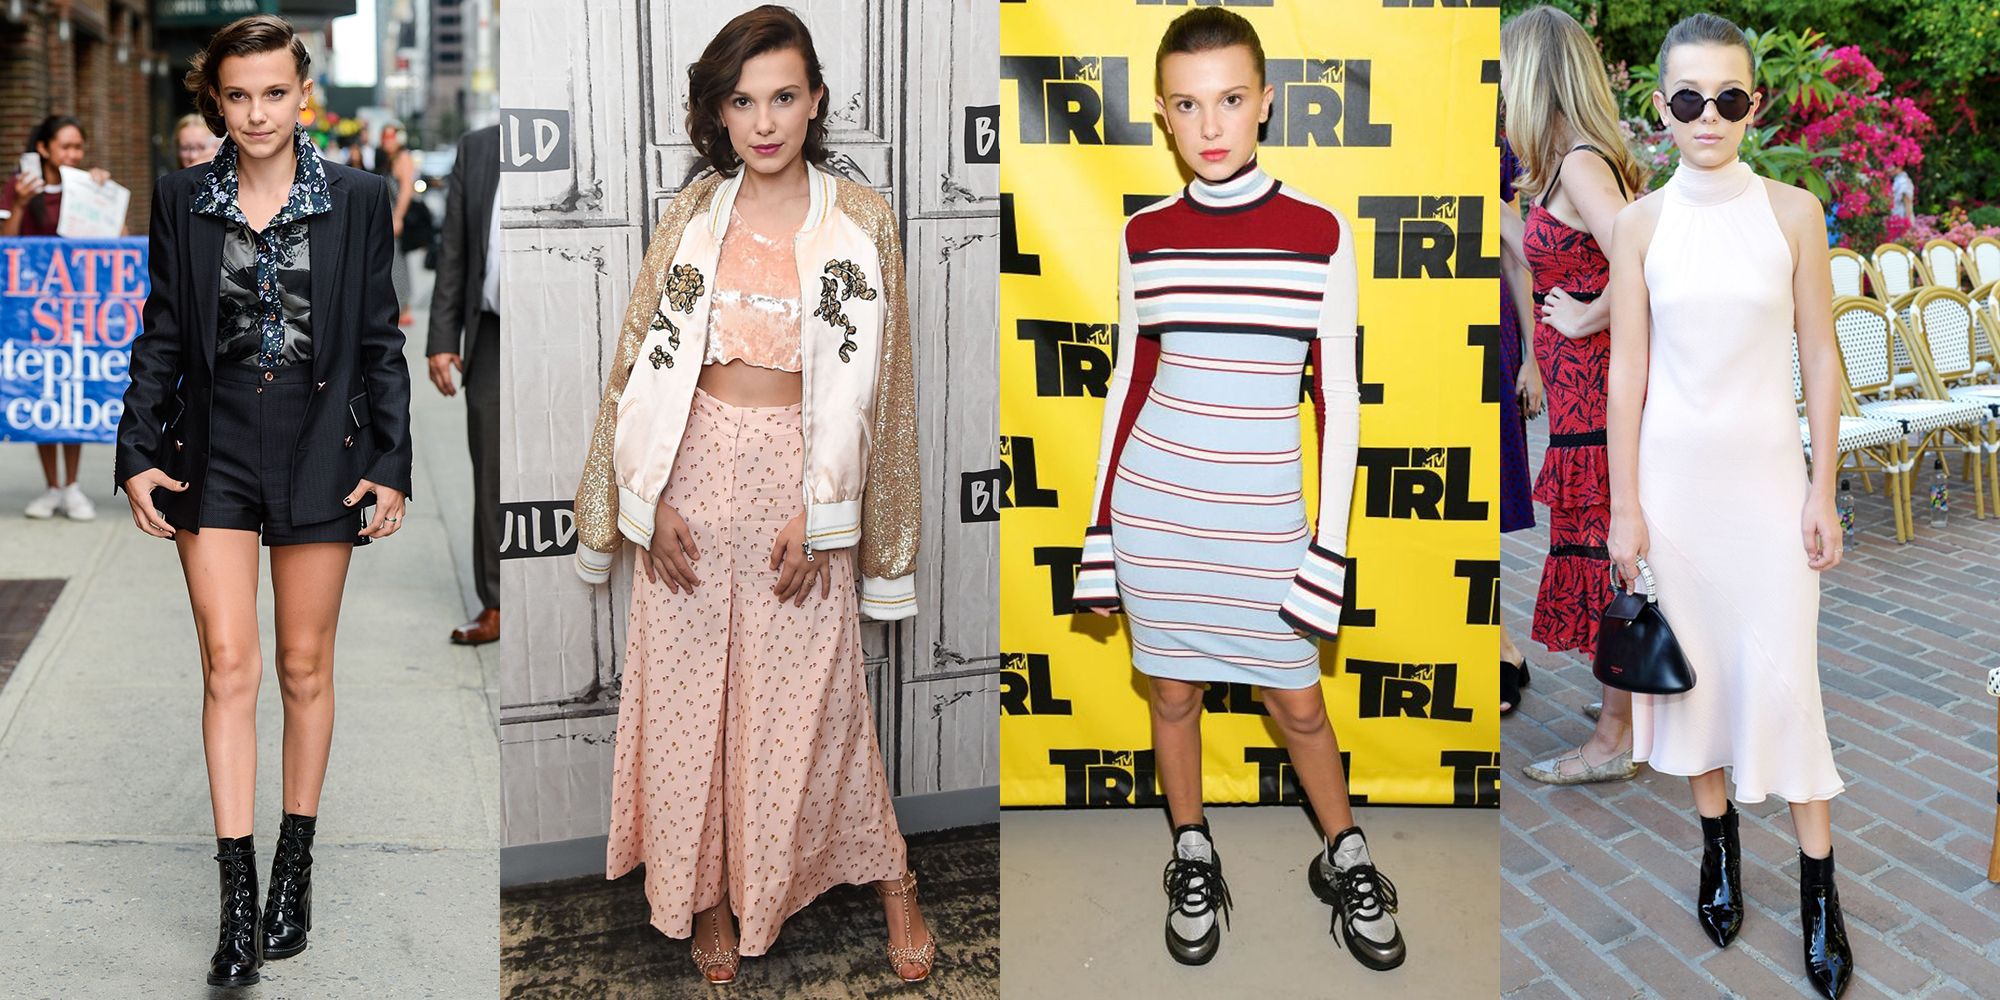 Millie Bobby Brown Clothes & Outfits, Page 2 of 3